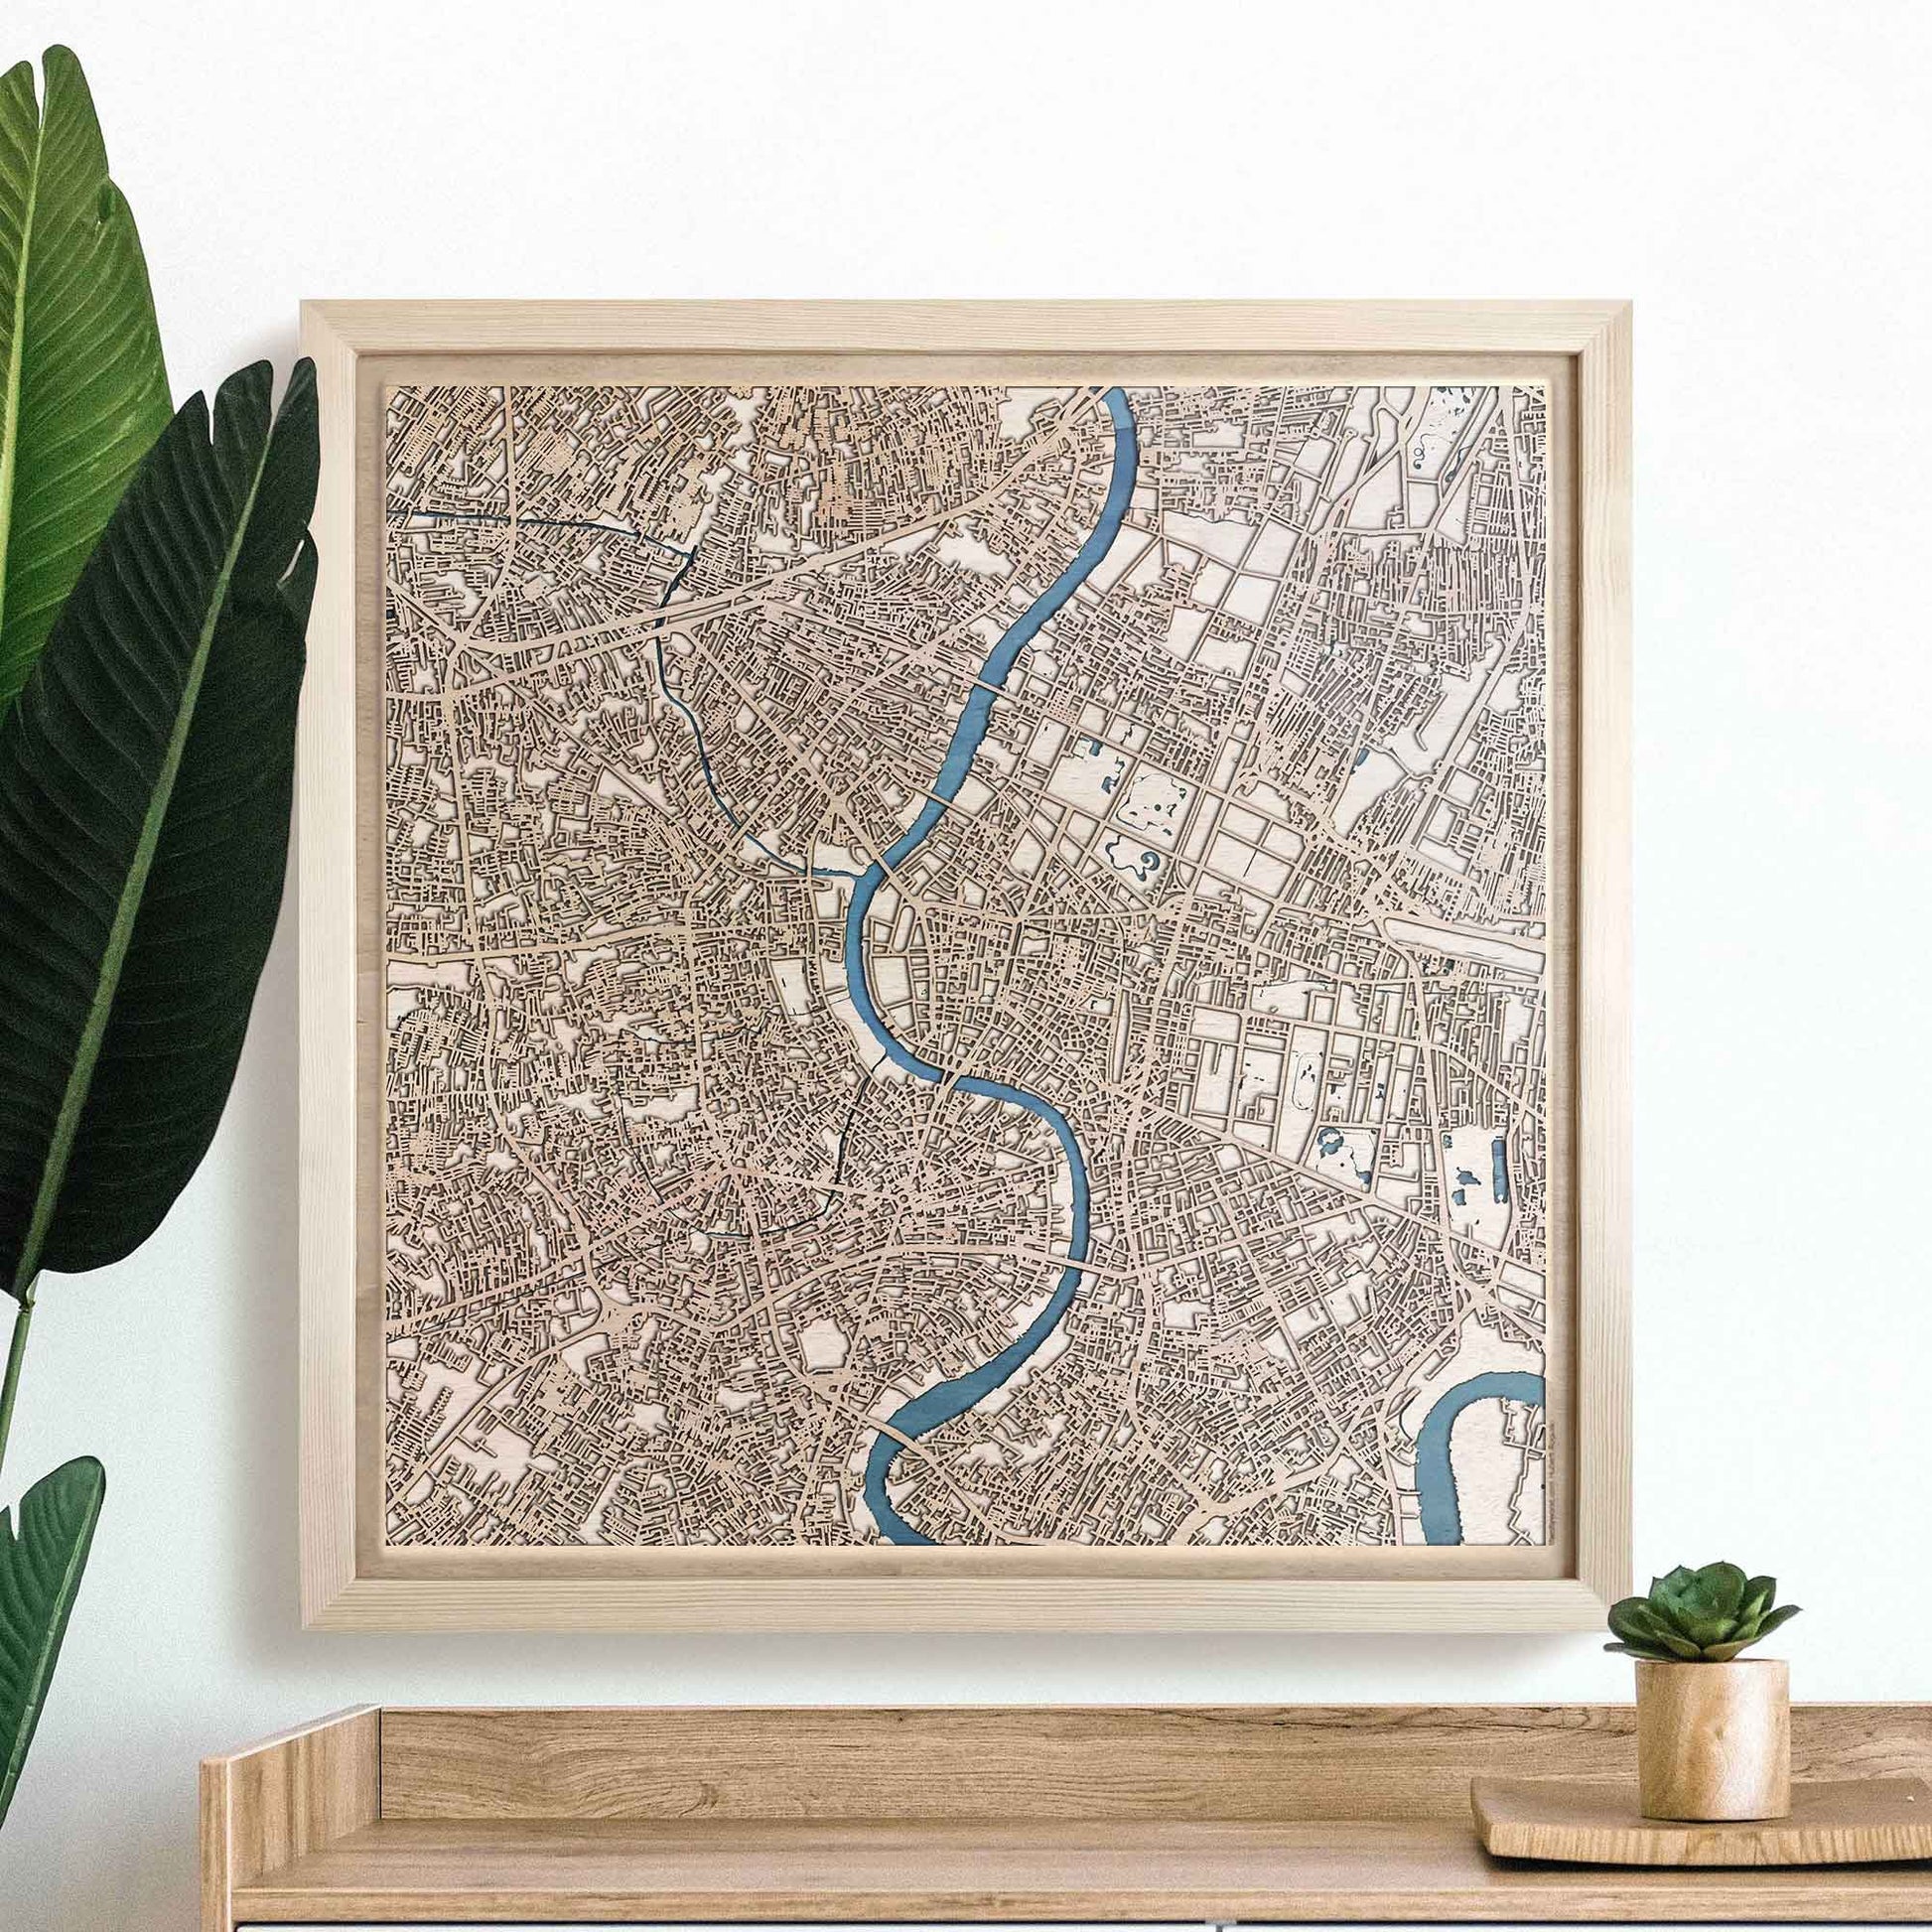 Bangkok Wooden Map by CityWood - Custom Wood Map Art - Unique Laser Cut Engraved - Anniversary Gift